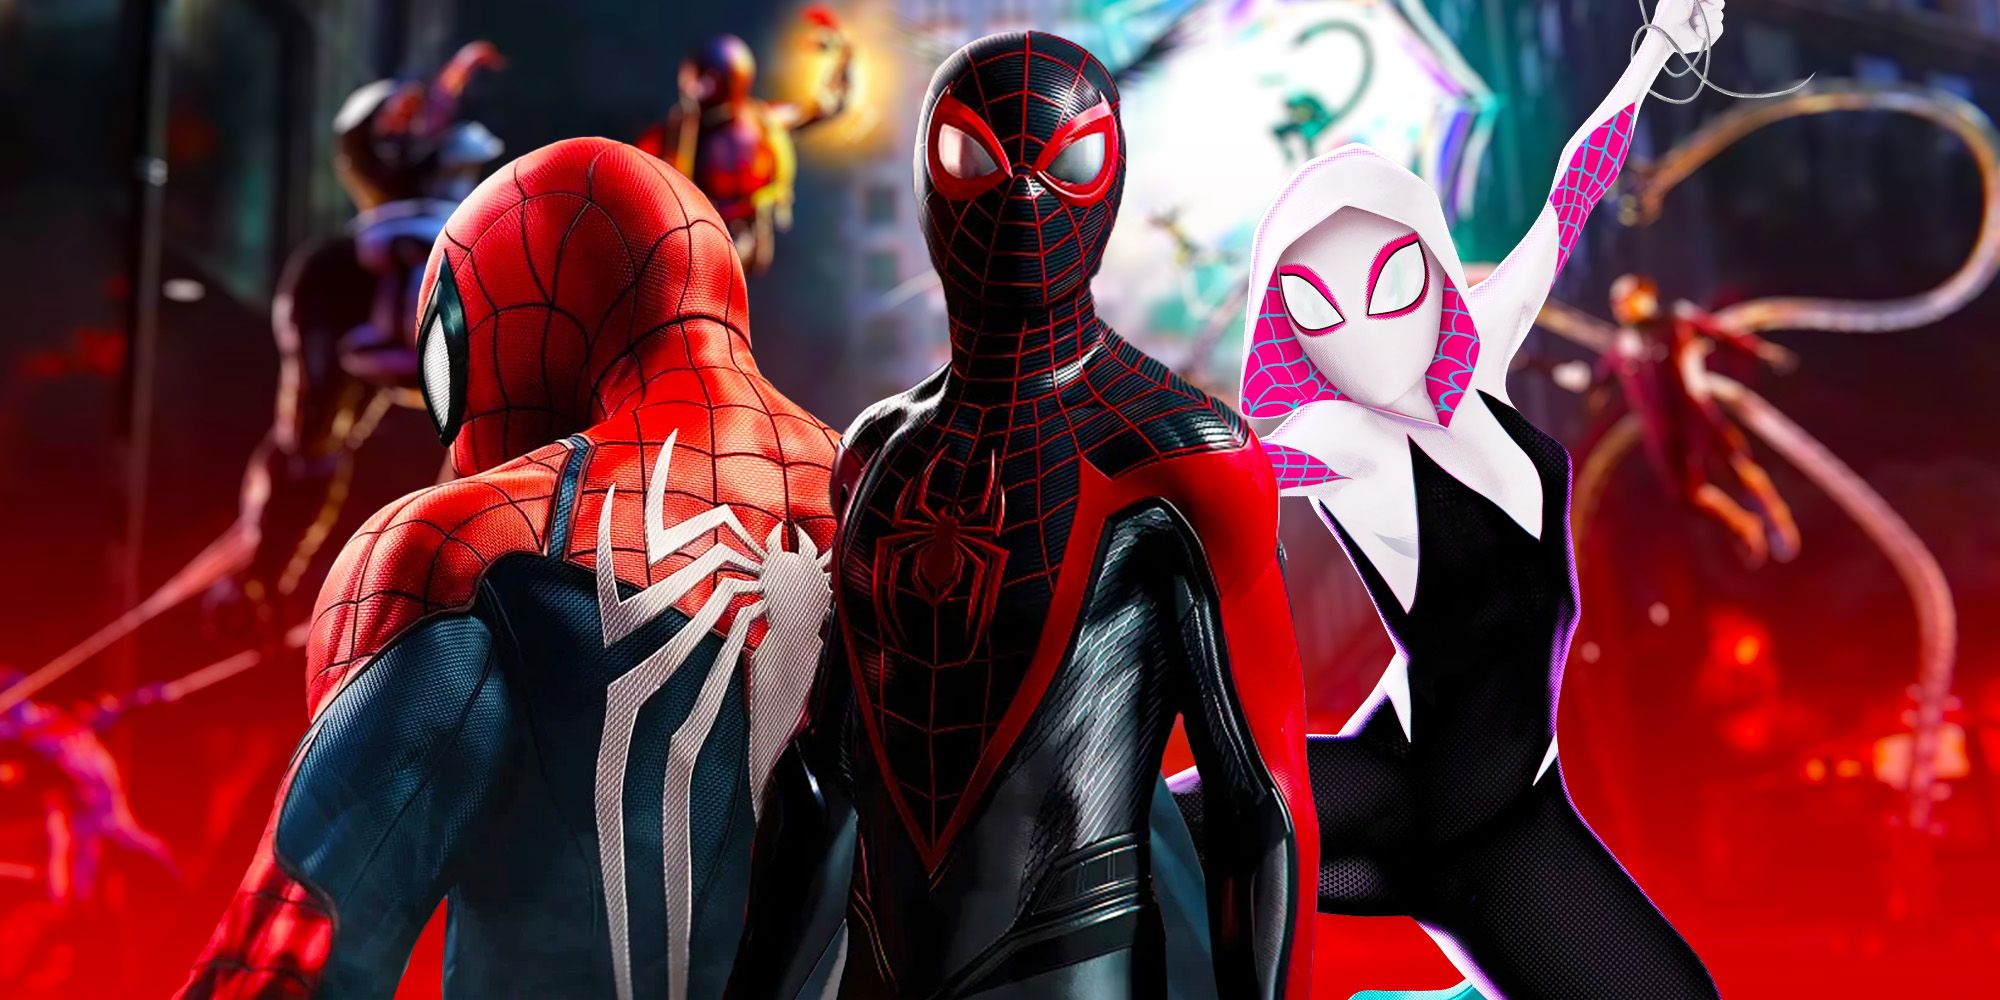 Peter Parker and Miles Morales as Spidermen in Marvel's Spider-Man 2 with Gwen Stacey as Spider-woman.